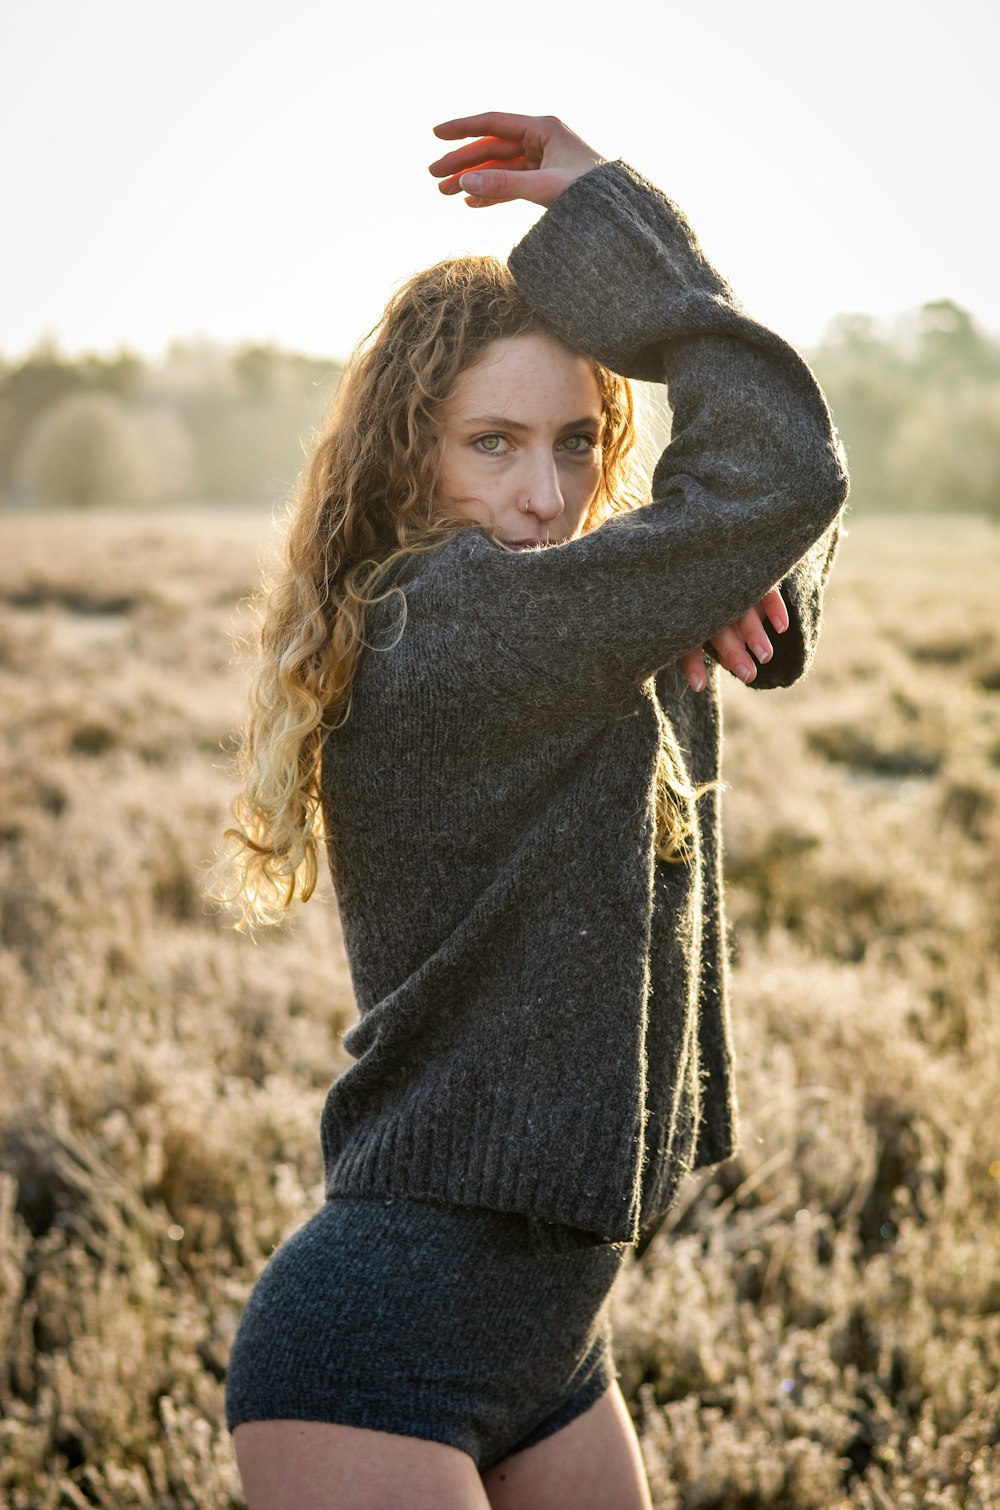 woman in black sweater and blue denim jeans standing on brown field during daytime